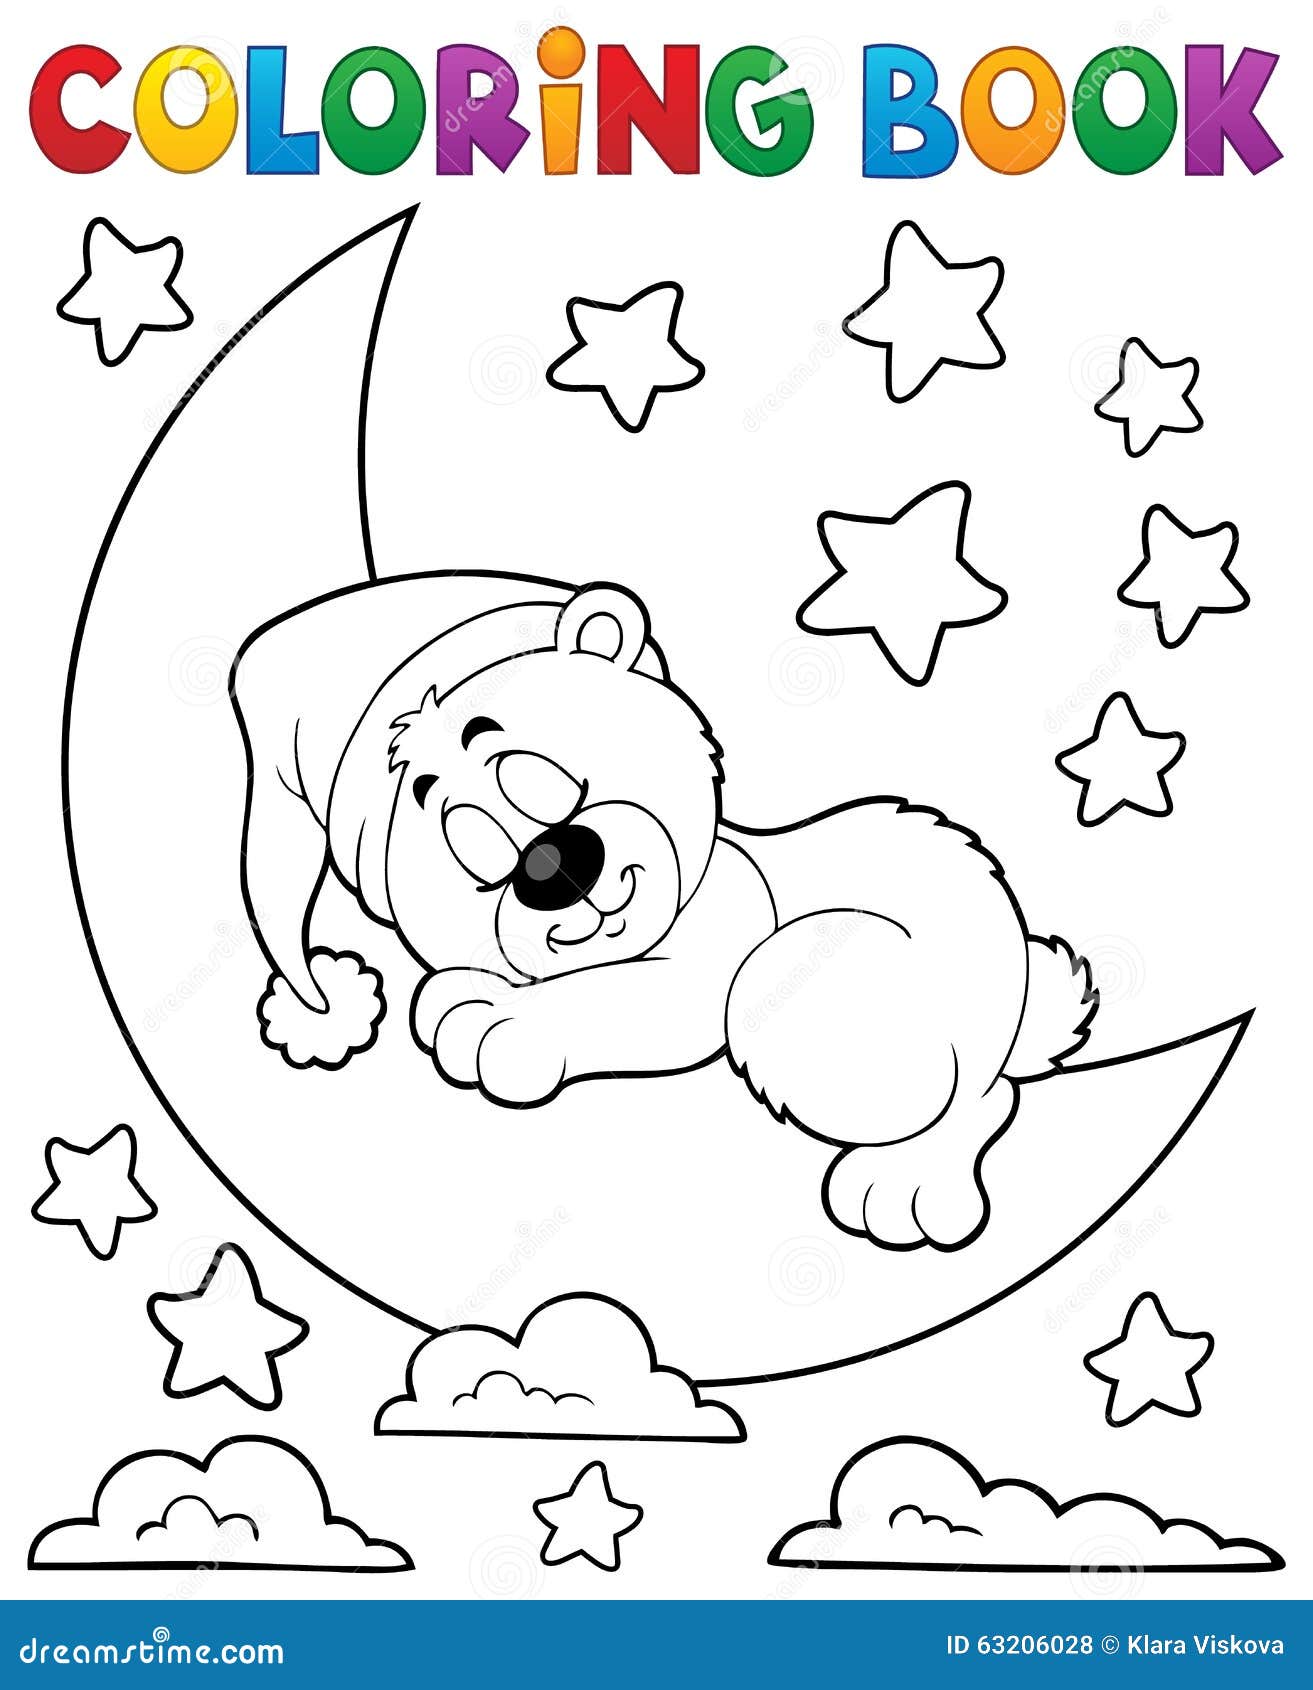 Coloring Book Cover Stock Illustrations – 11,987 Coloring Book Cover Stock  Illustrations, Vectors & Clipart - Dreamstime